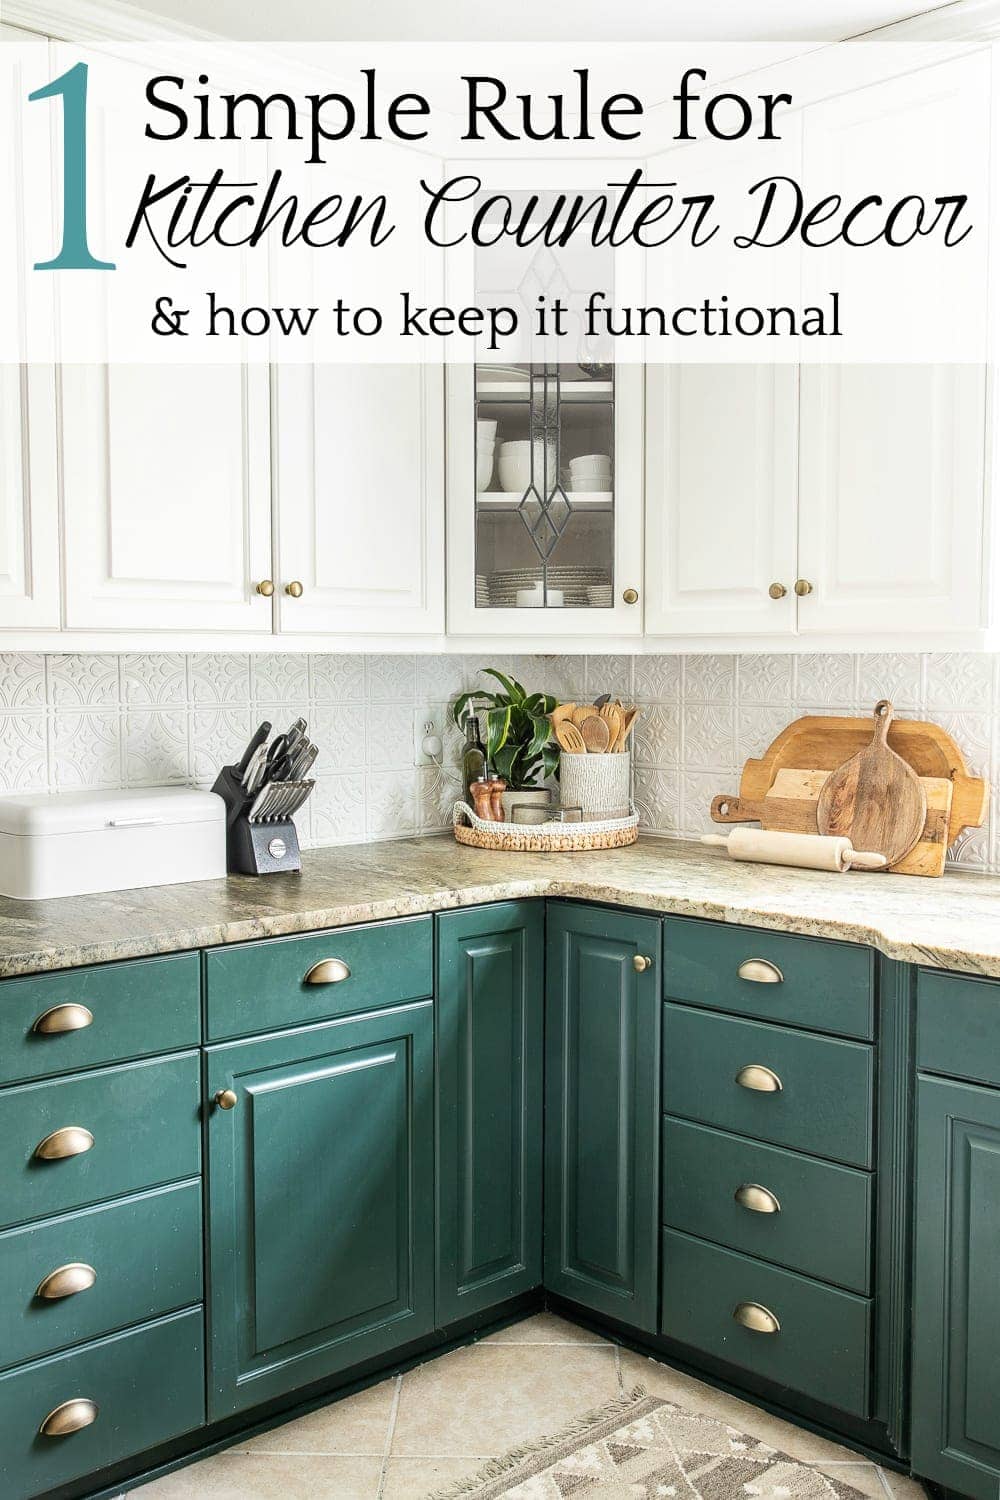 How to Decorate Kitchen Countertops | 1 simple rule for kitchen counter decor and 10 items to make them pretty but still functional while cutting the clutter.